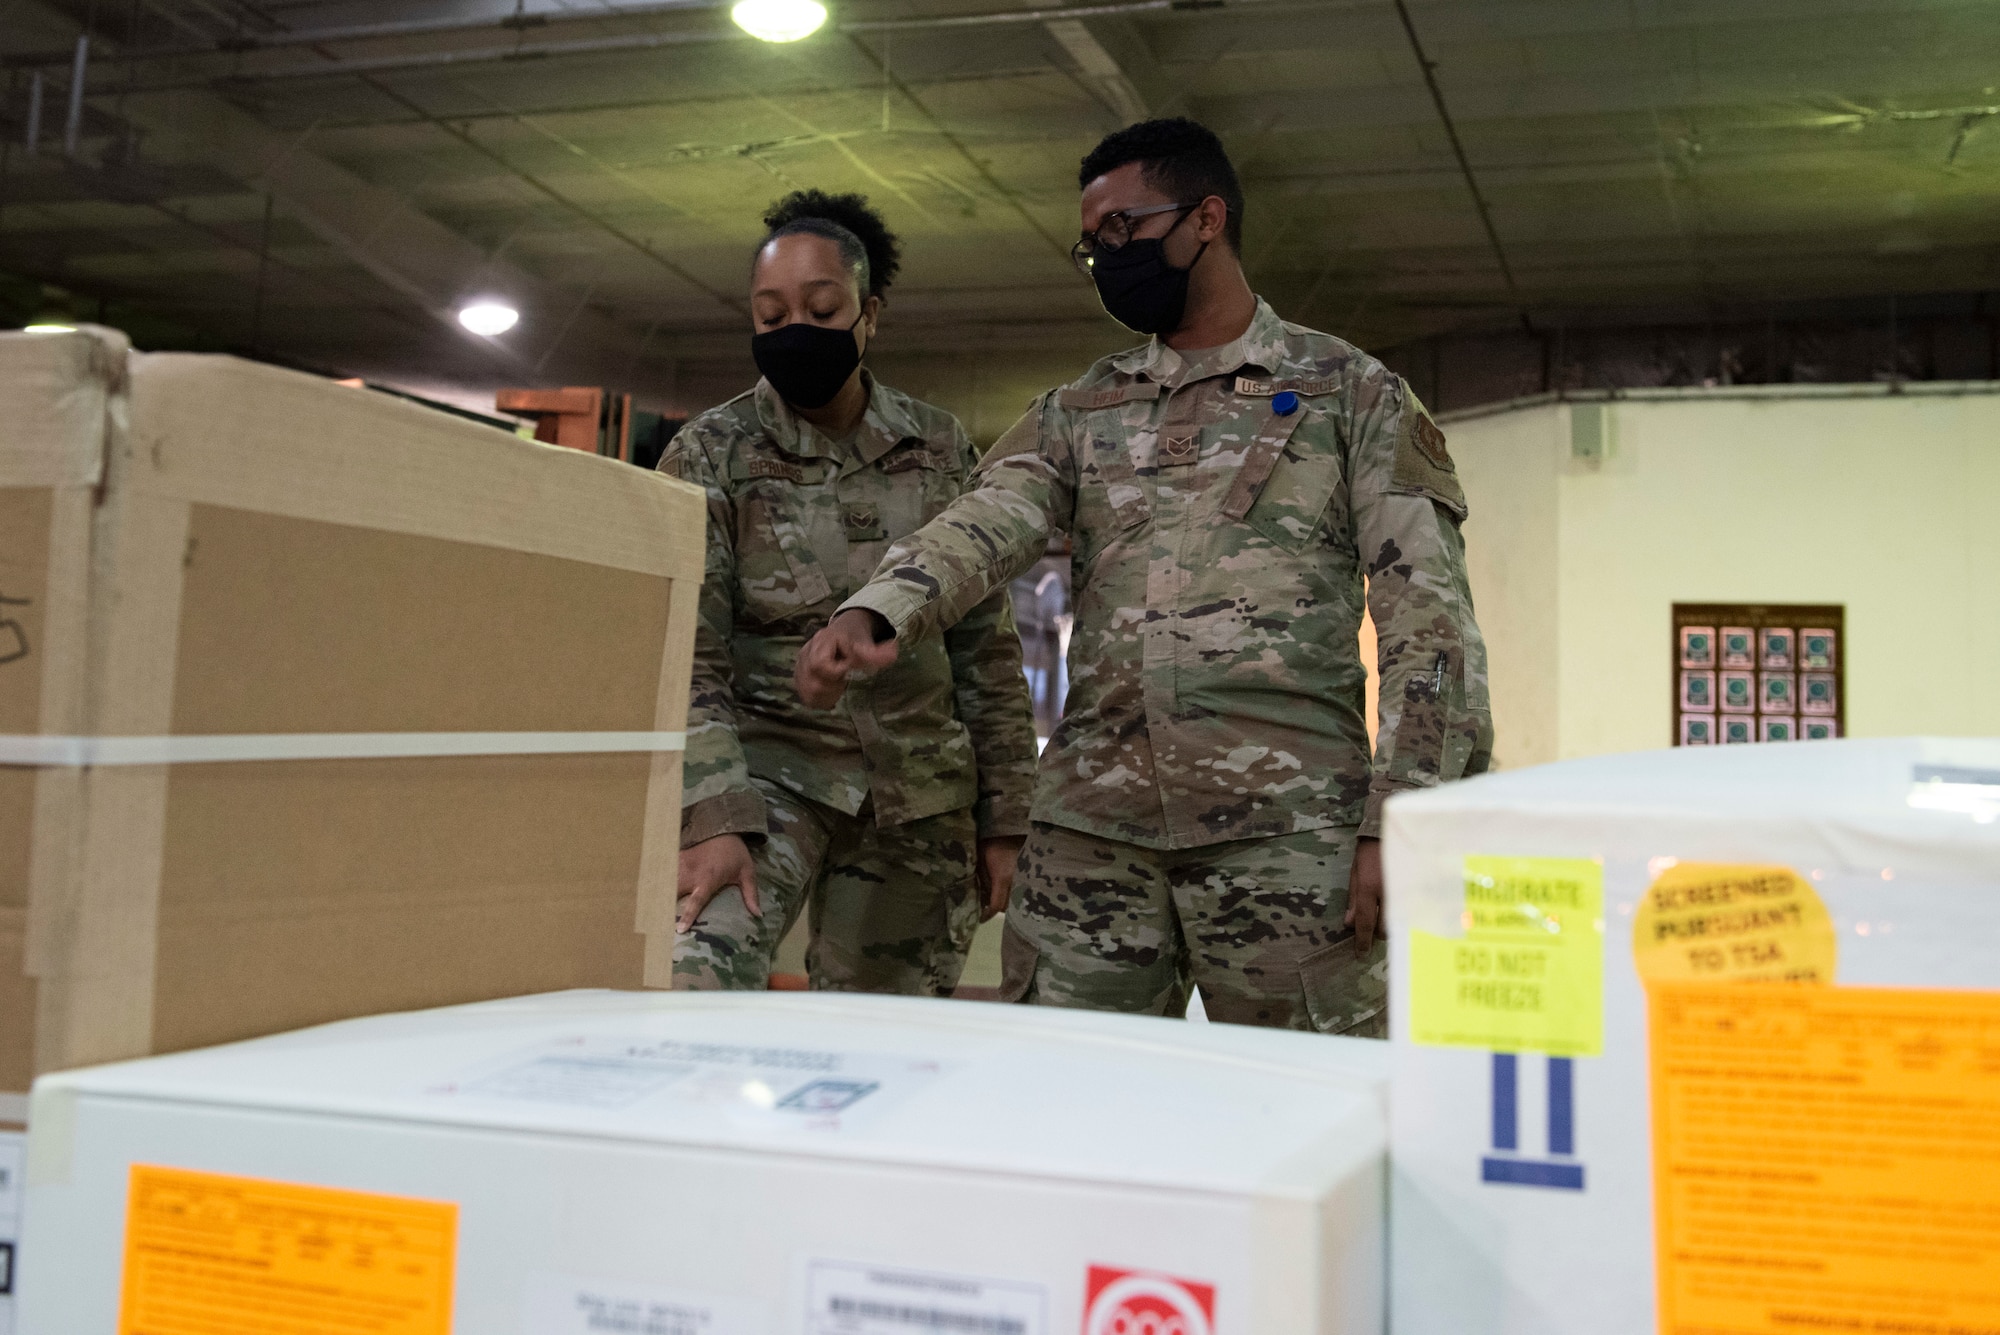 Two Airmen stand in front of small cargo boxes and inspect the labels.